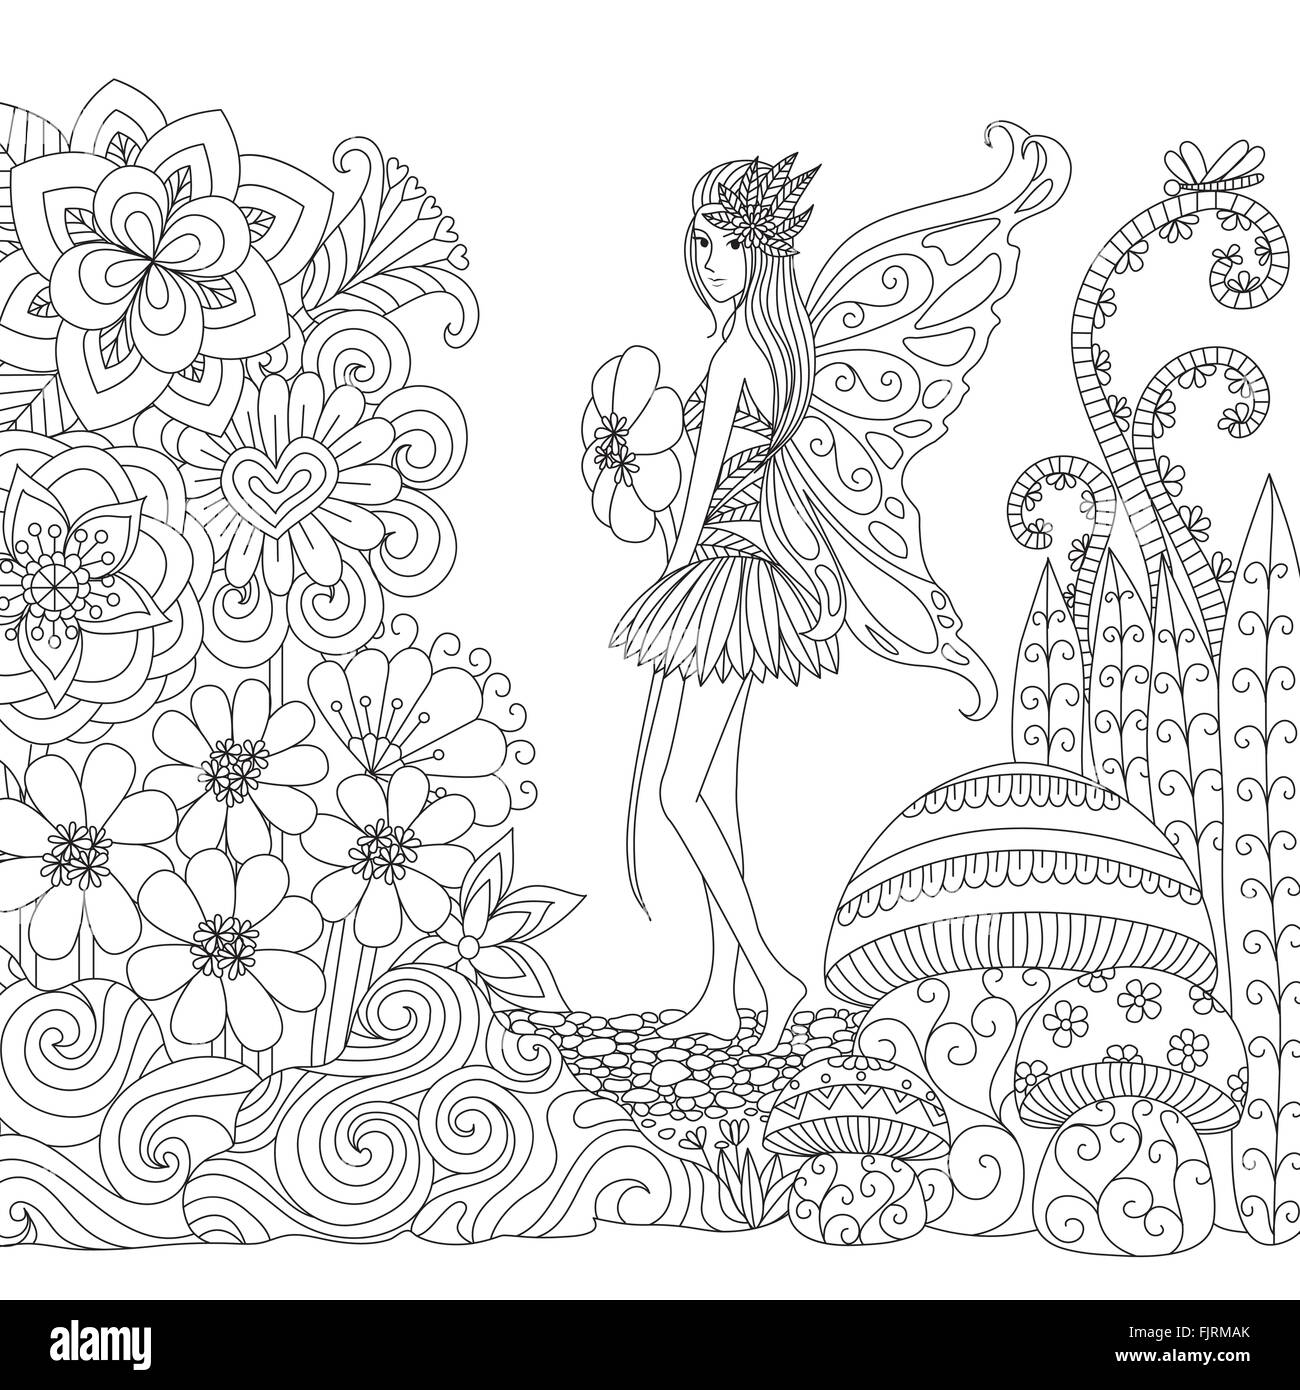 Hand drawn fairy flying in flower land for coloring book for adult Stock Vector